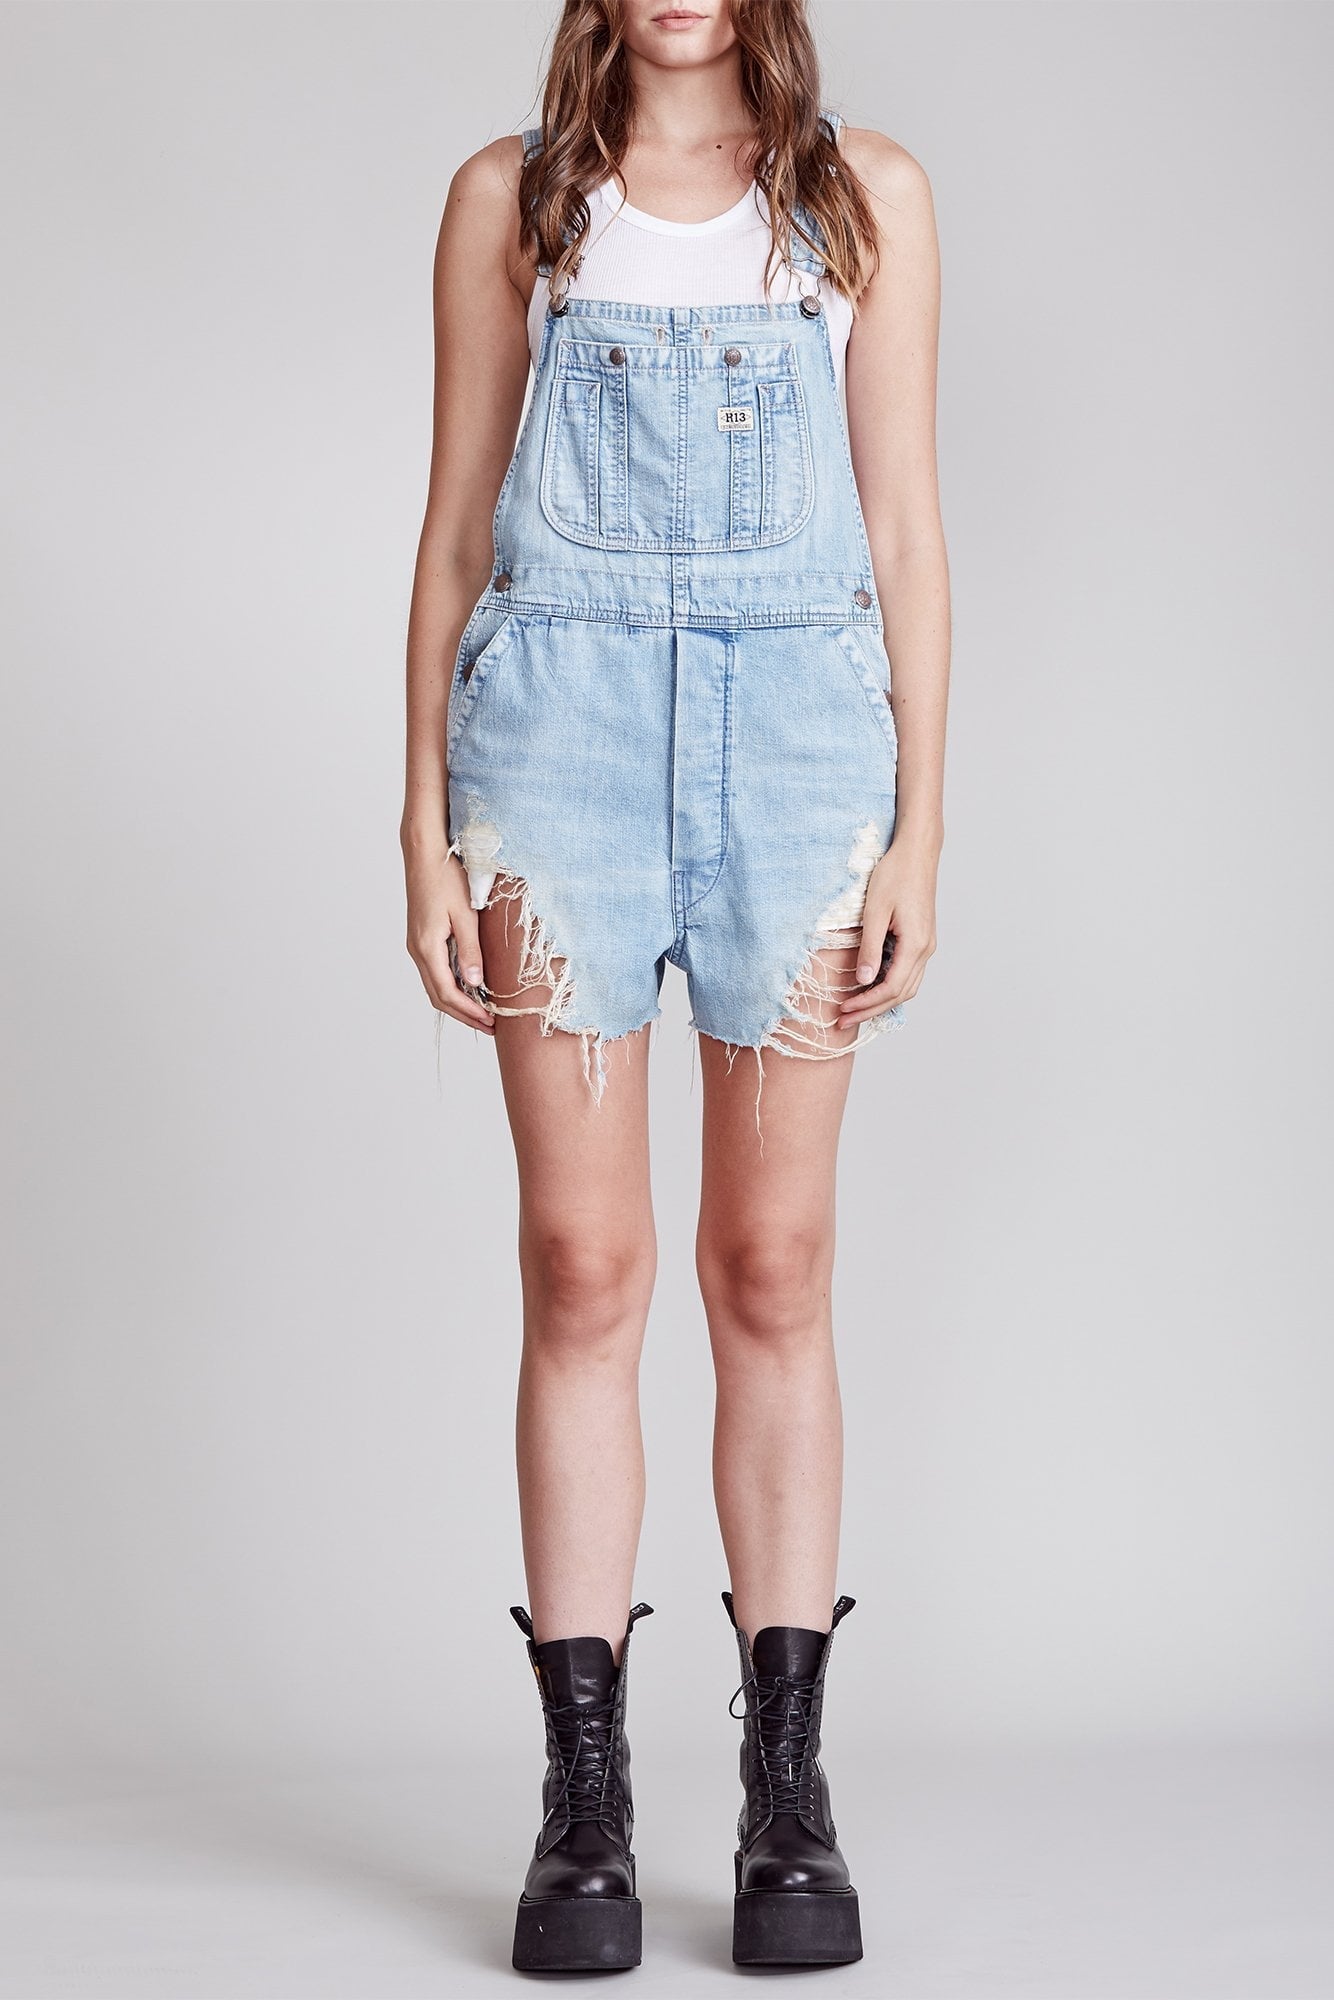 OVERALL SHORT - PALE BLUE